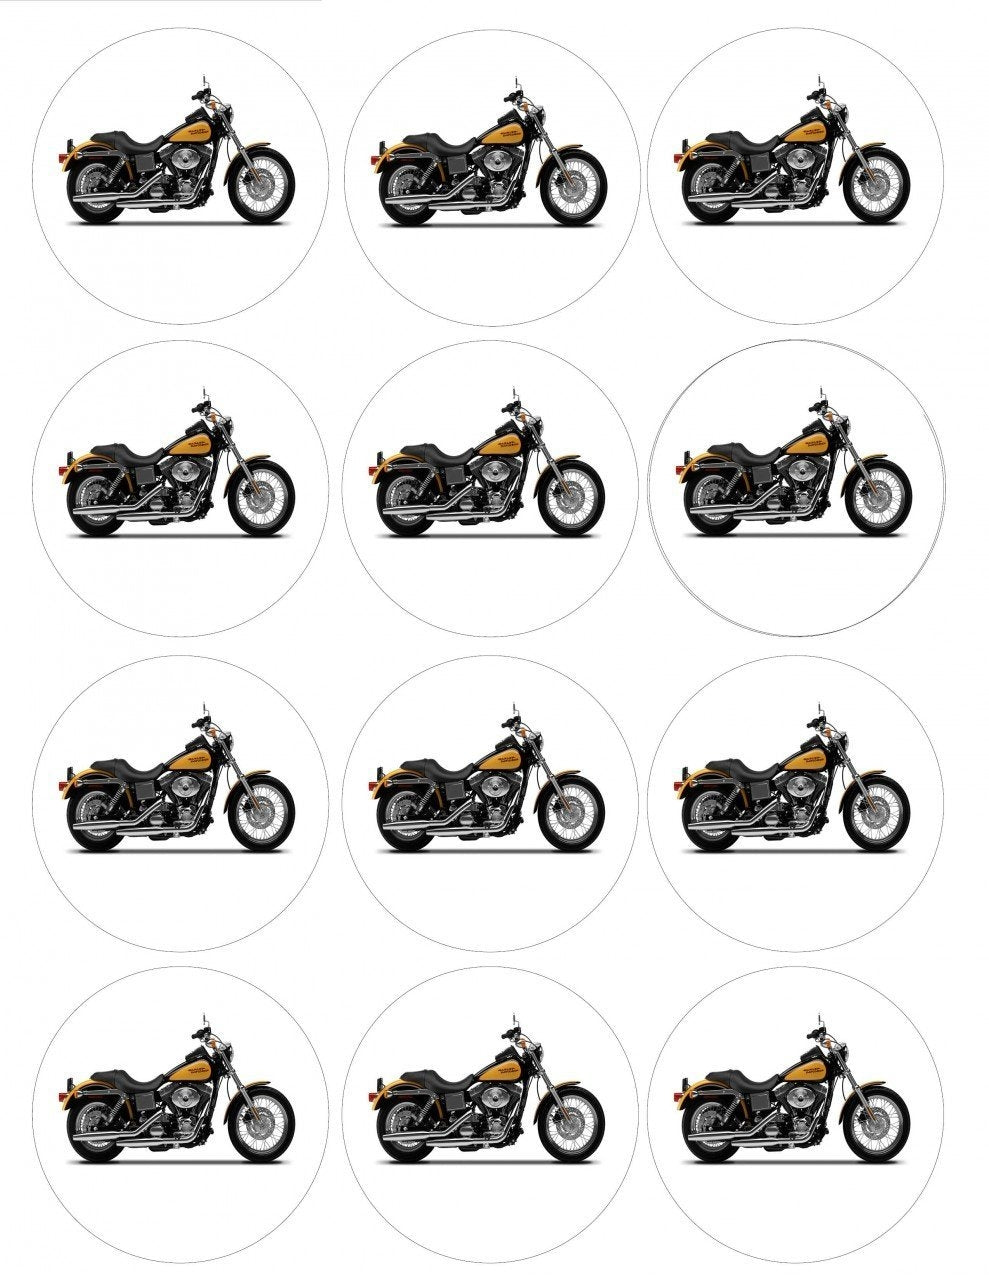 Harley-Davidson Yellow and Black Motor Cycle Edible Cupcake Topper Images ABPID09168